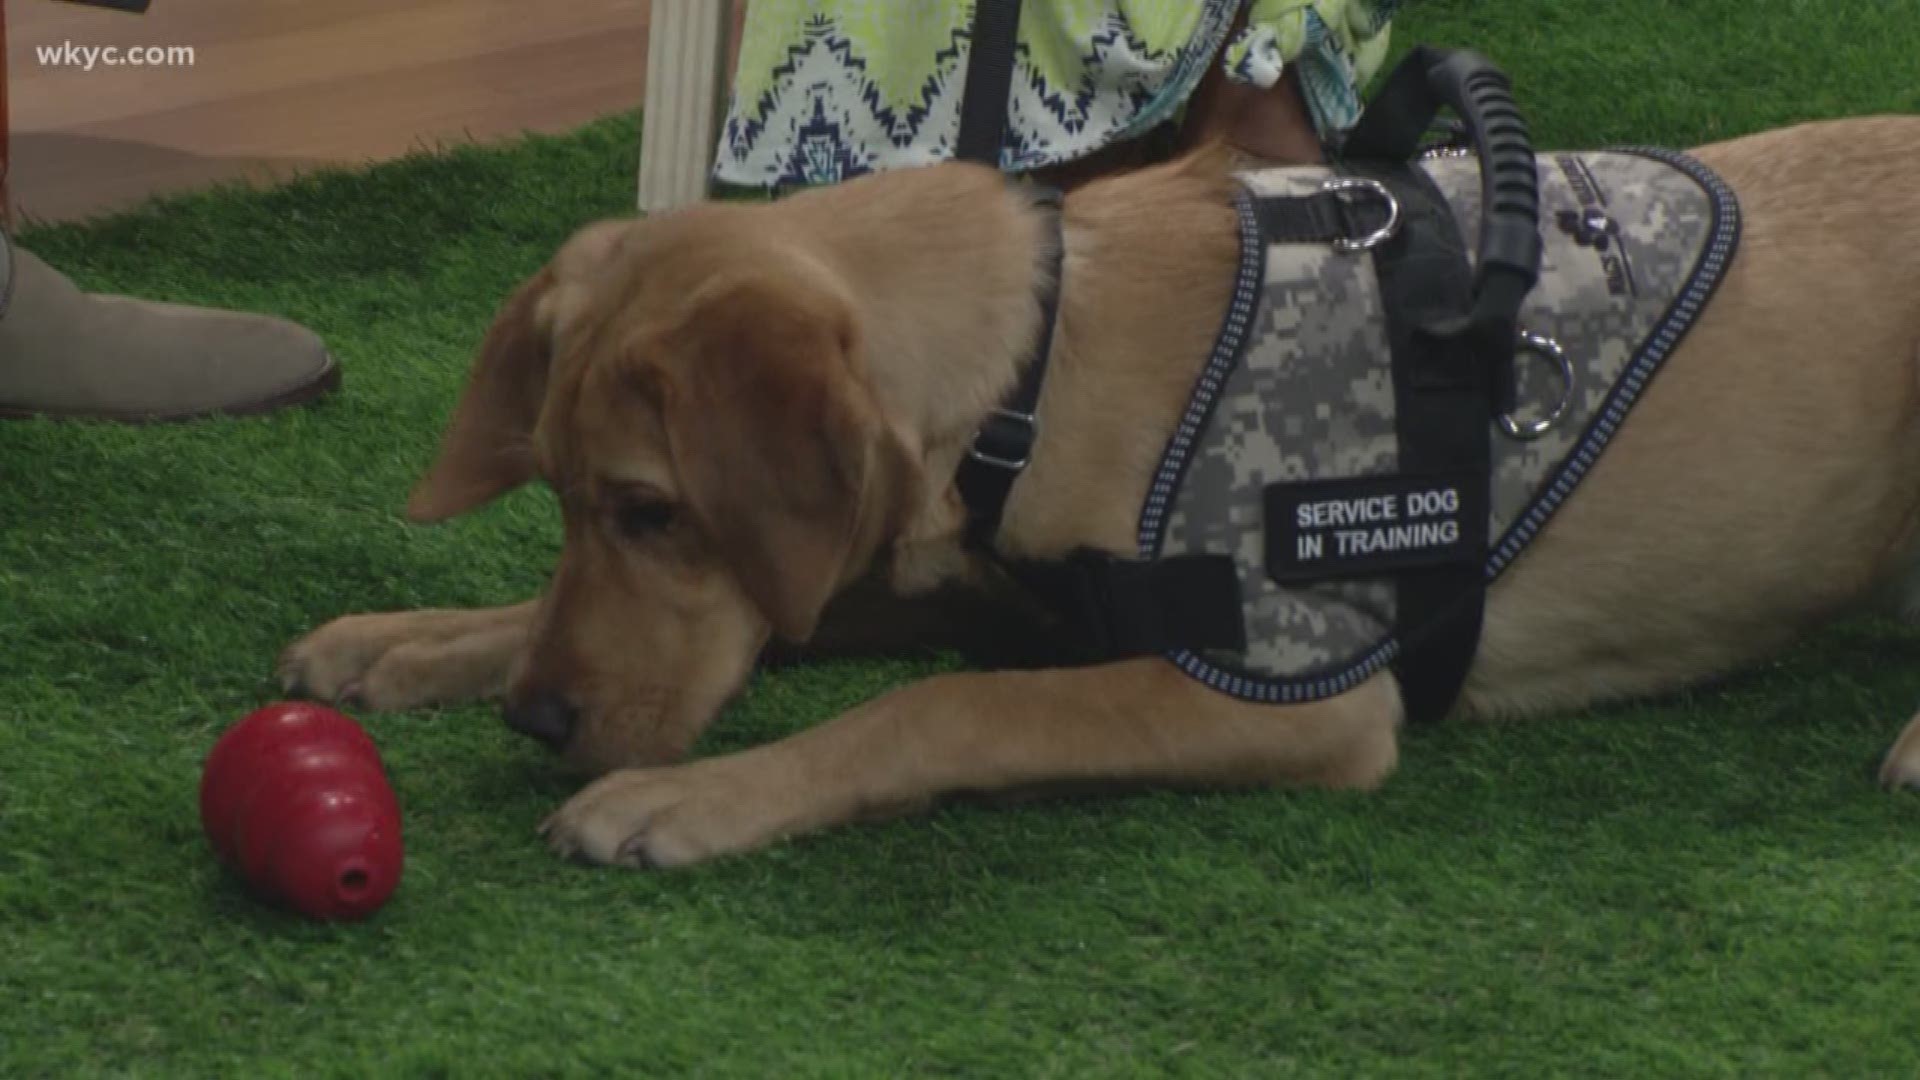 Service Dog in Training Vest: Do You Need It?